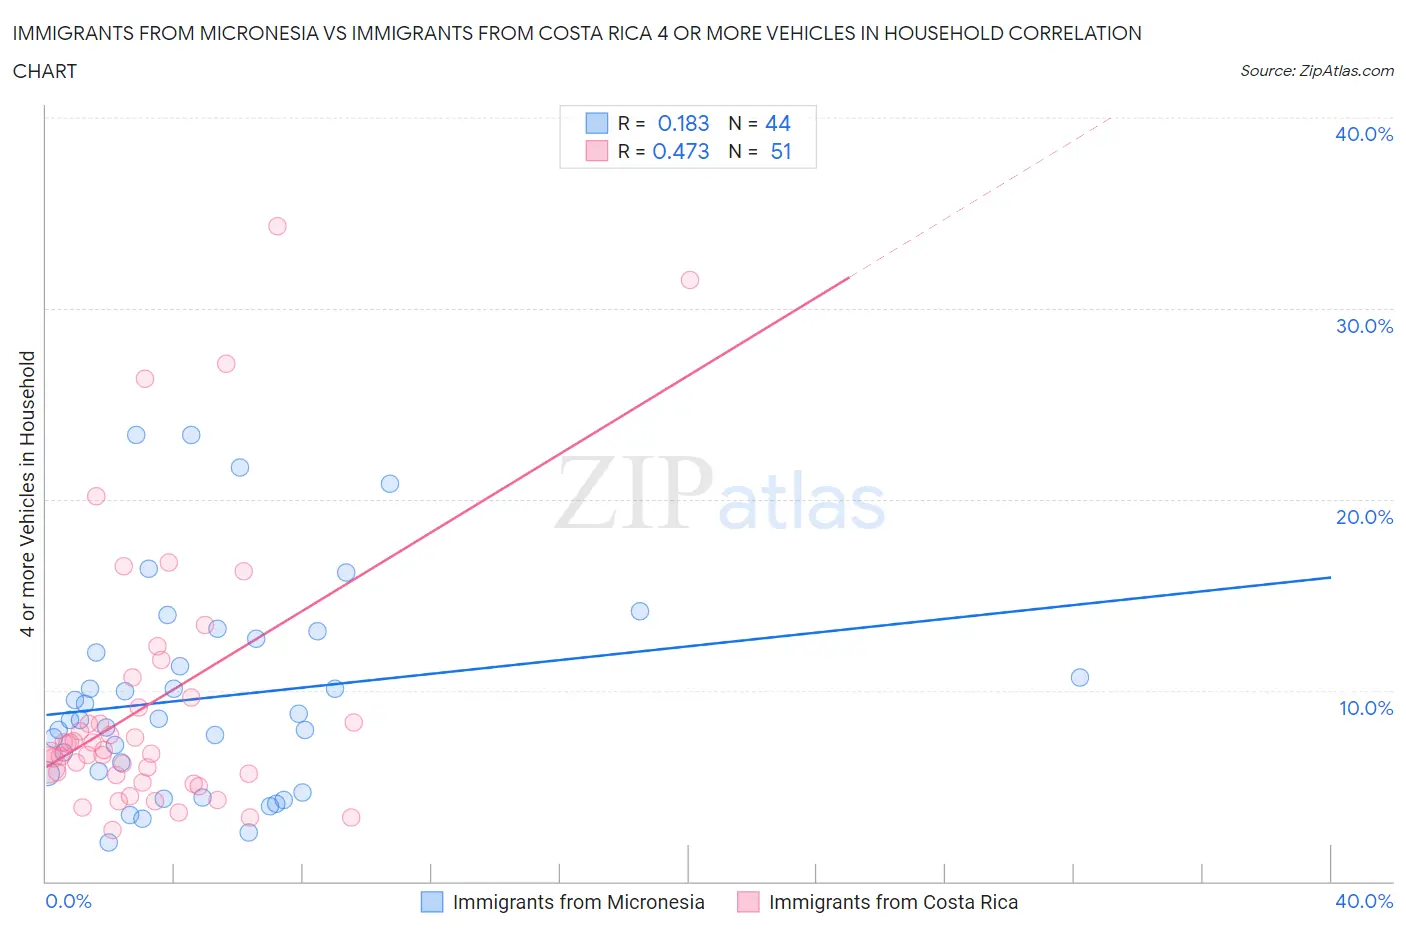 Immigrants from Micronesia vs Immigrants from Costa Rica 4 or more Vehicles in Household